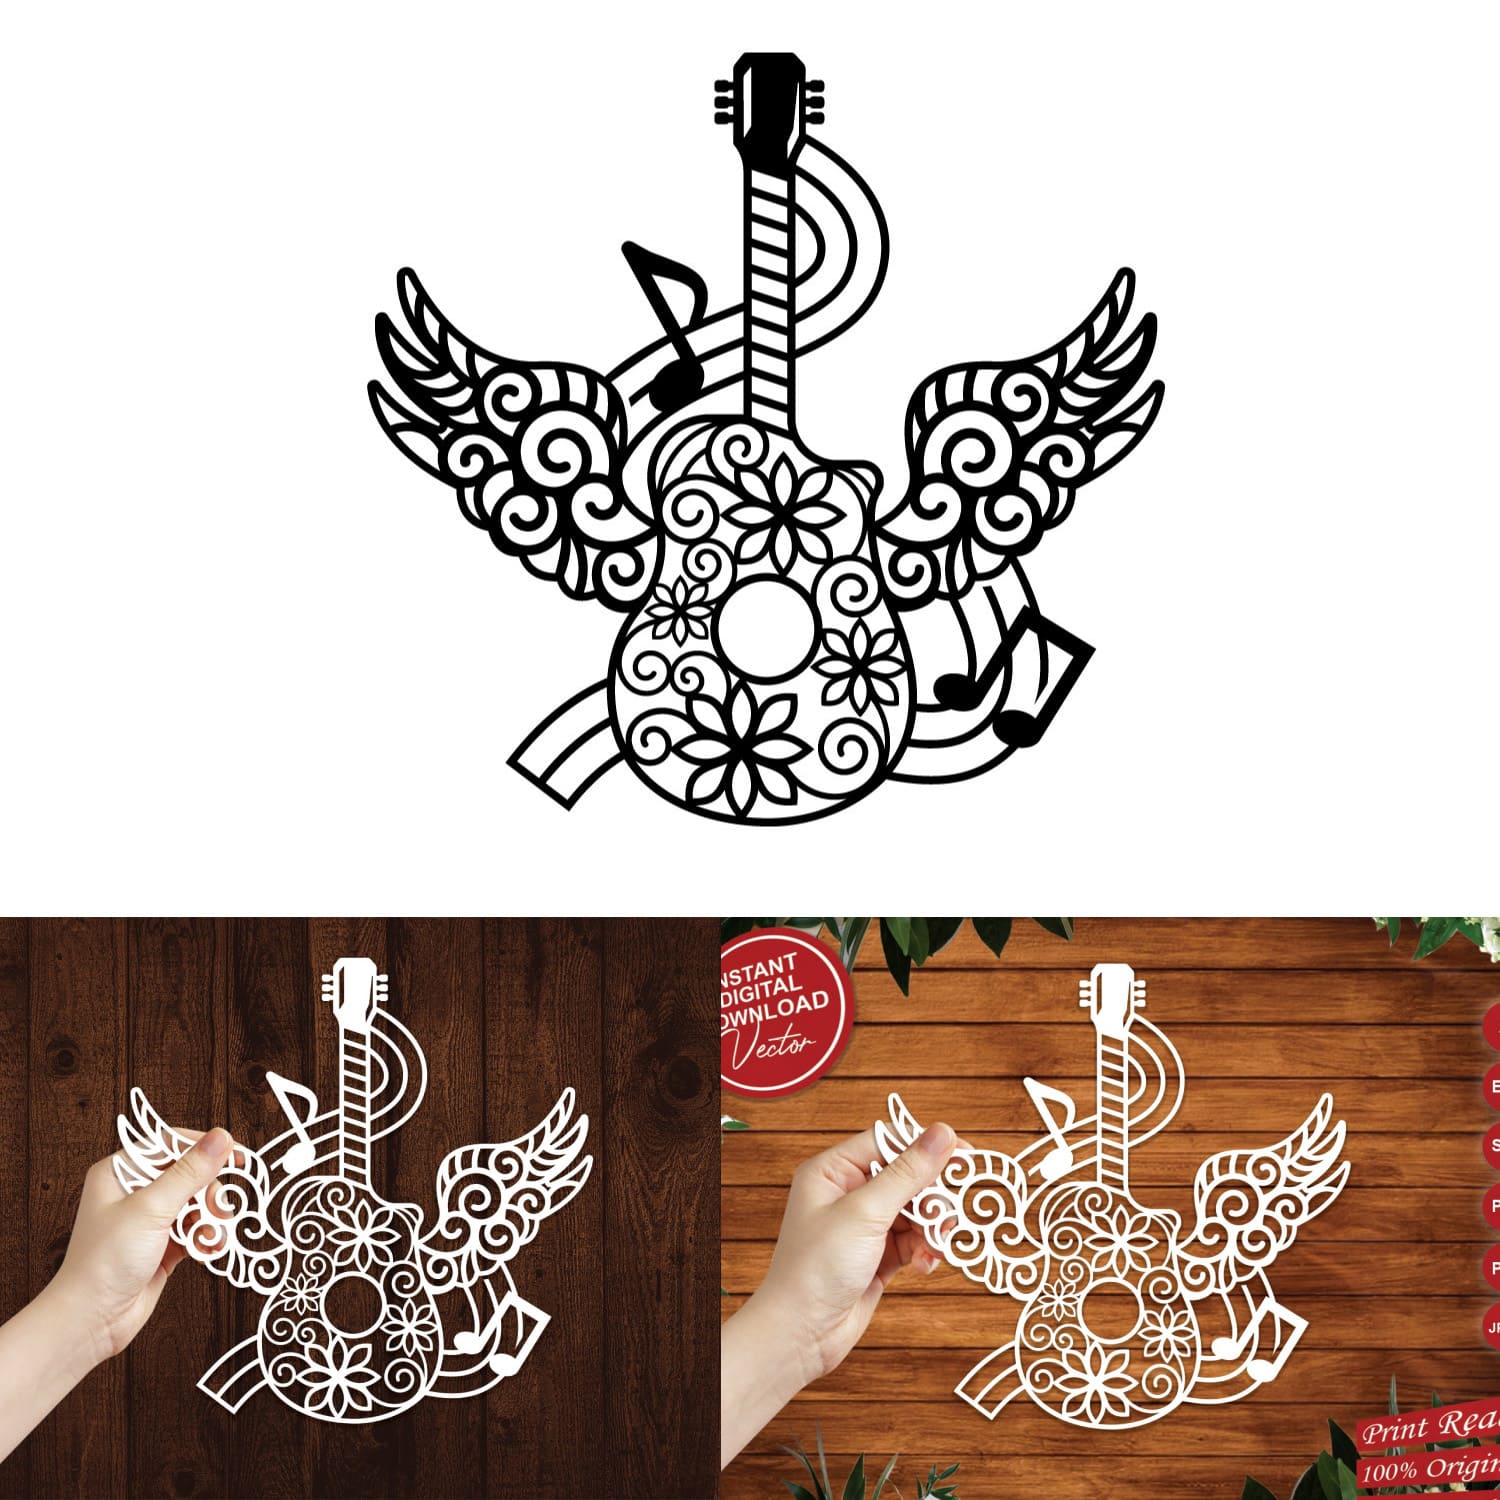 Flower Guitar with Wings and Music Notes SVG, Papercut cover.